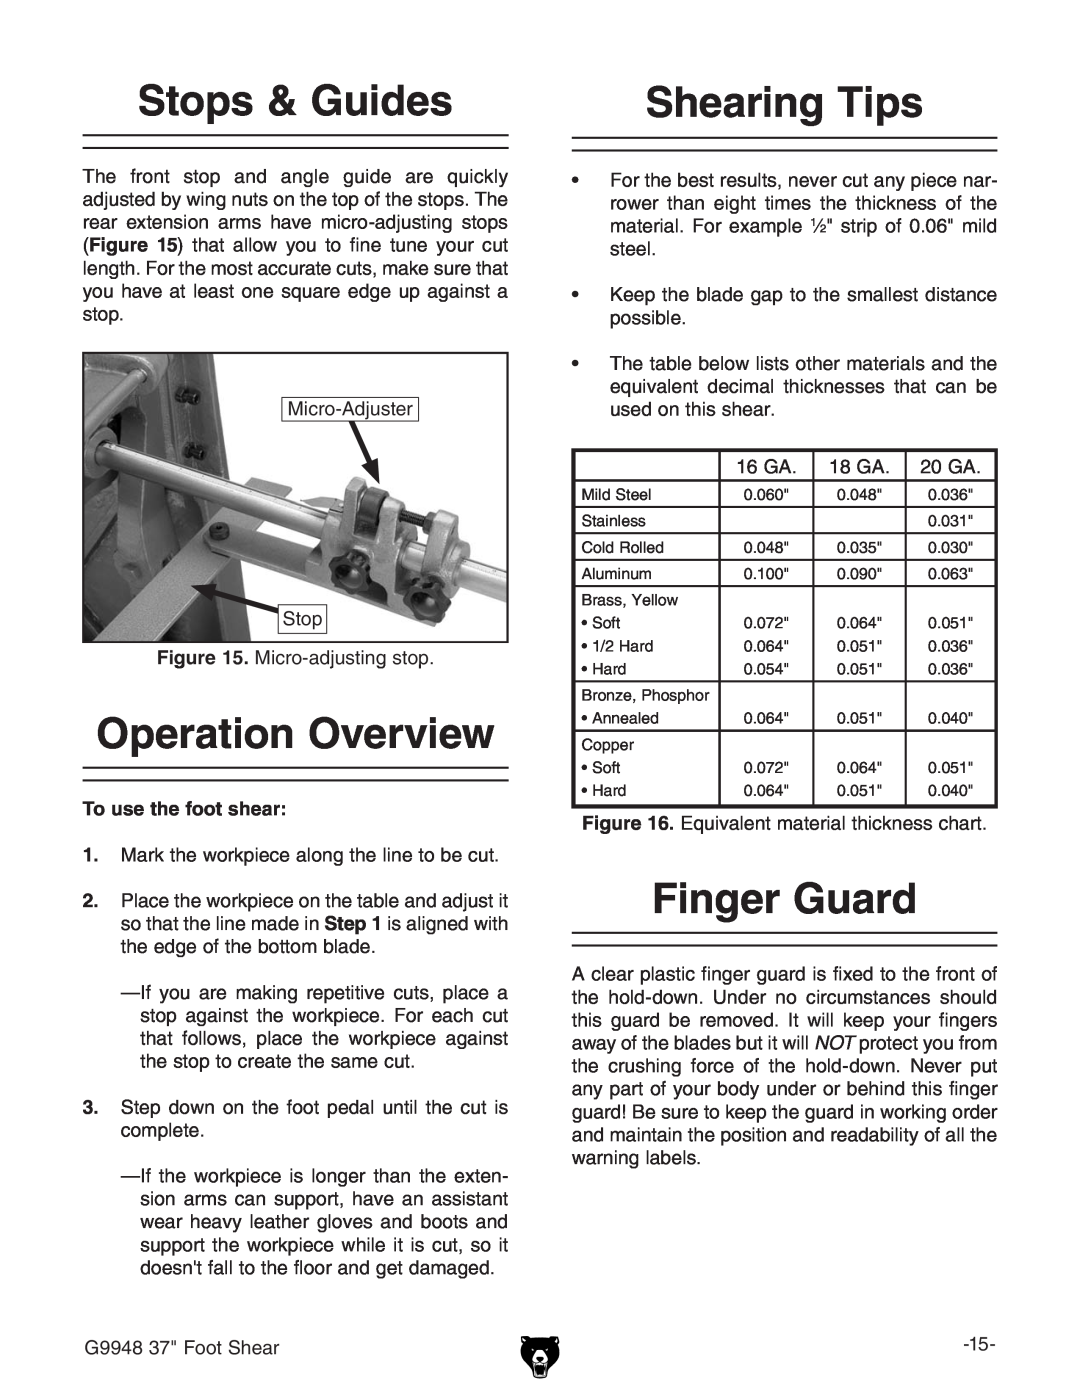 Grizzly G9948 Stops & Guides, Operation Overview, Shearing Tips, Finger Guard, BXgd6YjhiZg Hide .BXgdVYjhic\hide#, +6# 